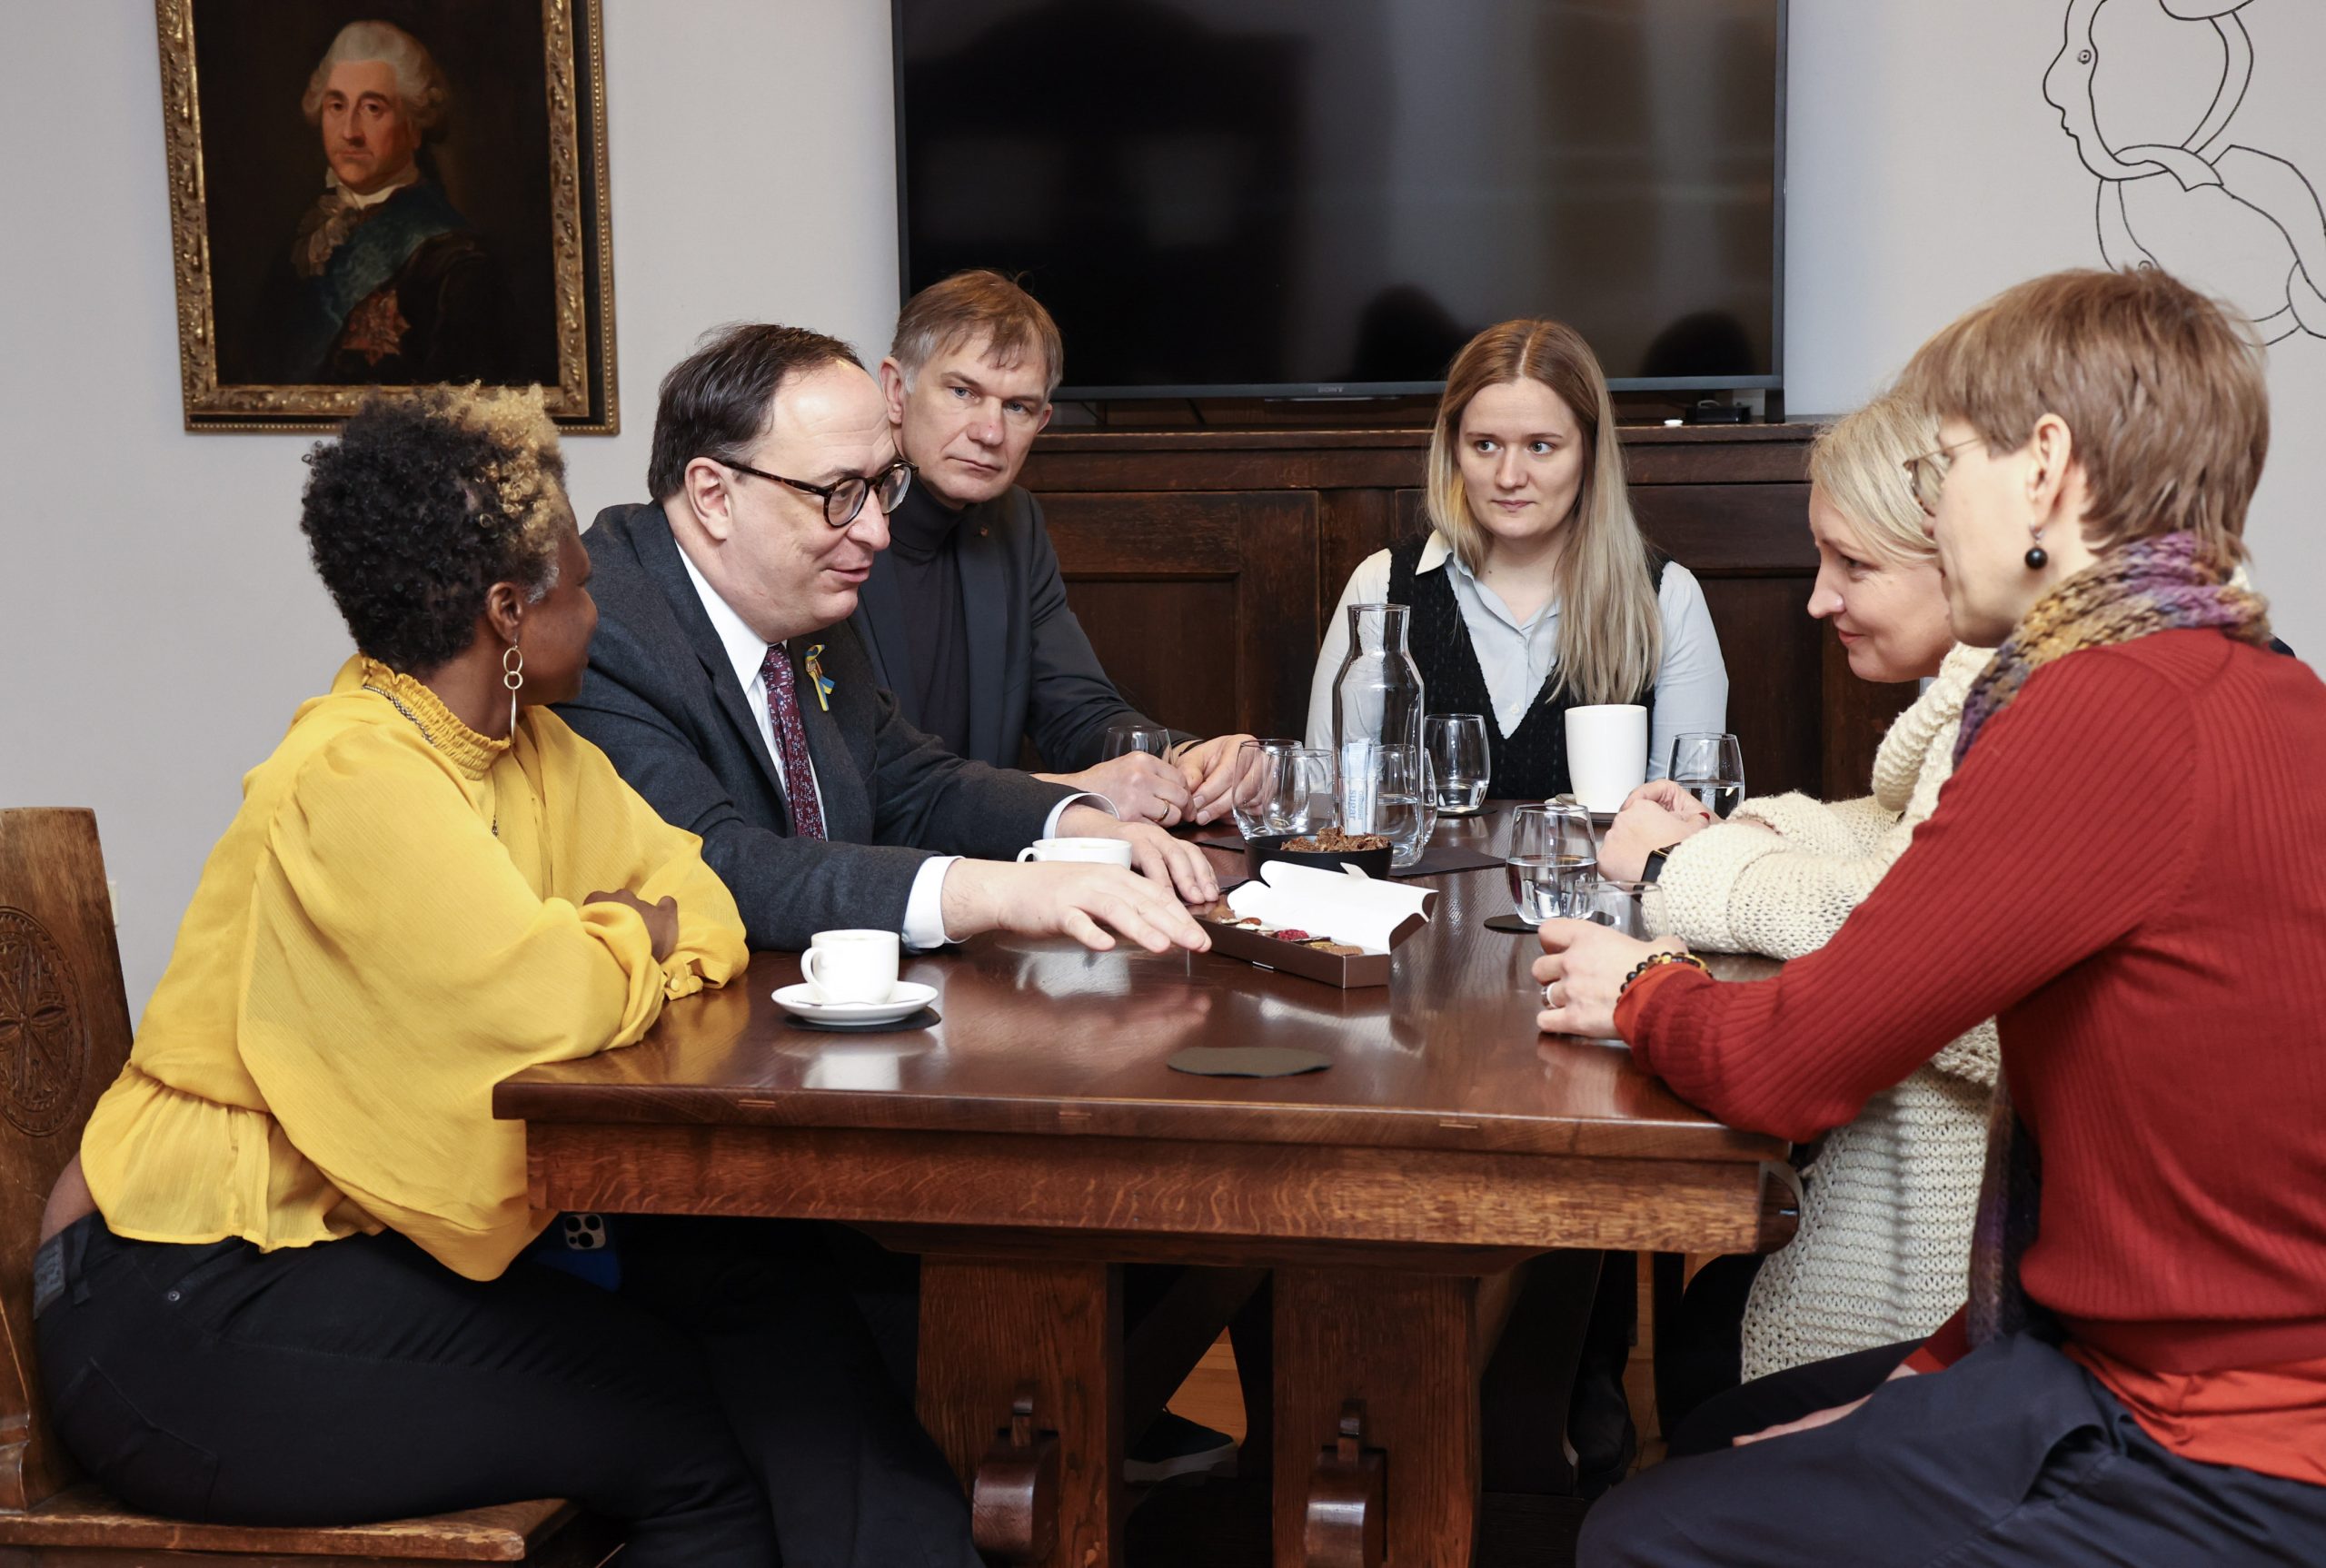 The next morning, Charlton and Ambassador Gilchrist met with artists and faculty at the Vilnius Academy of Arts.